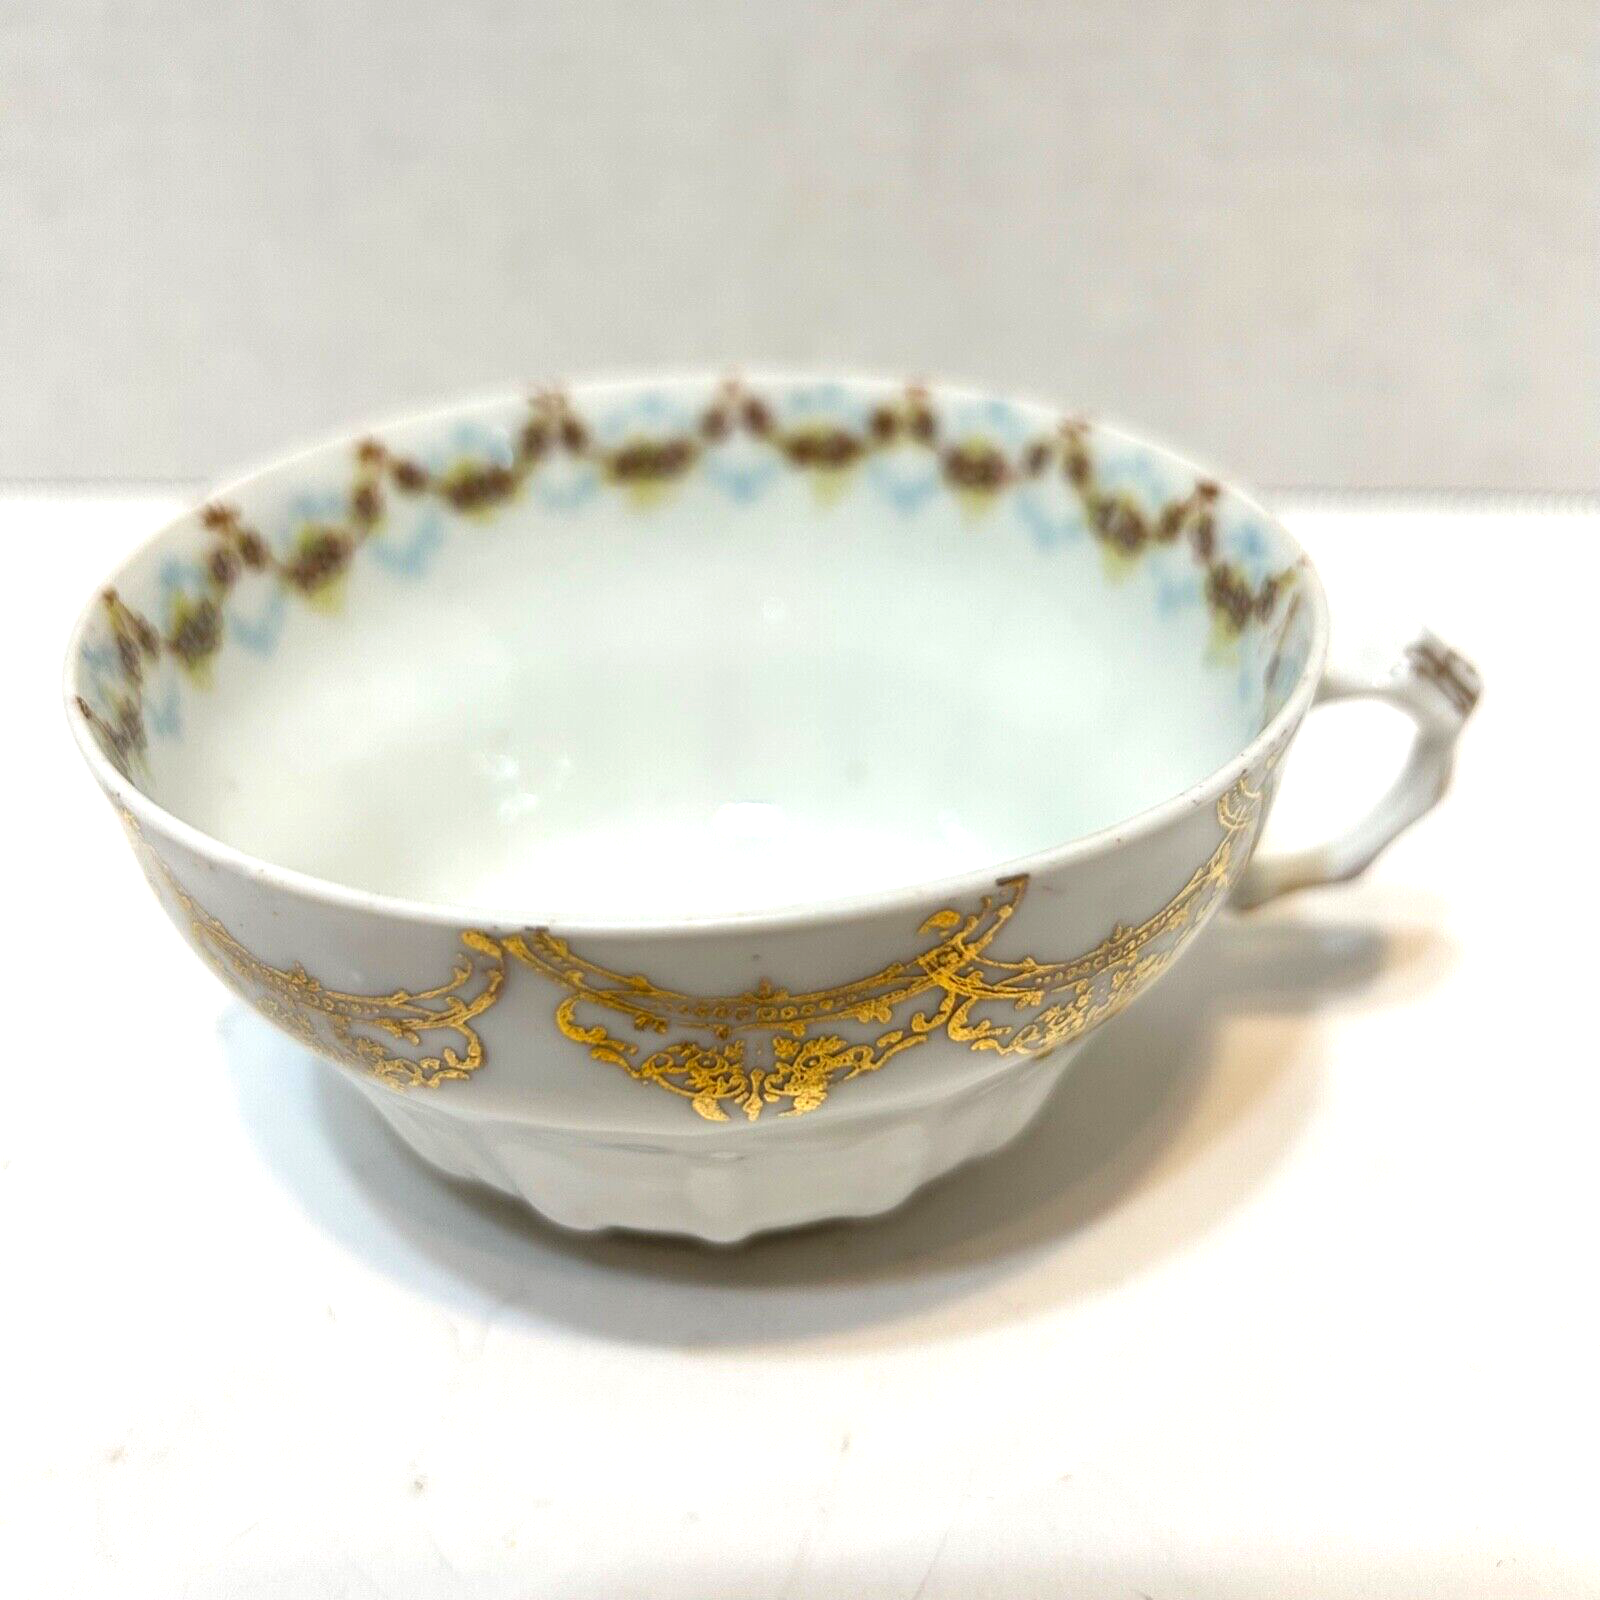 Primary image for Vintage Imperial China Delicate Tea Cup Floral Design Made In Austria